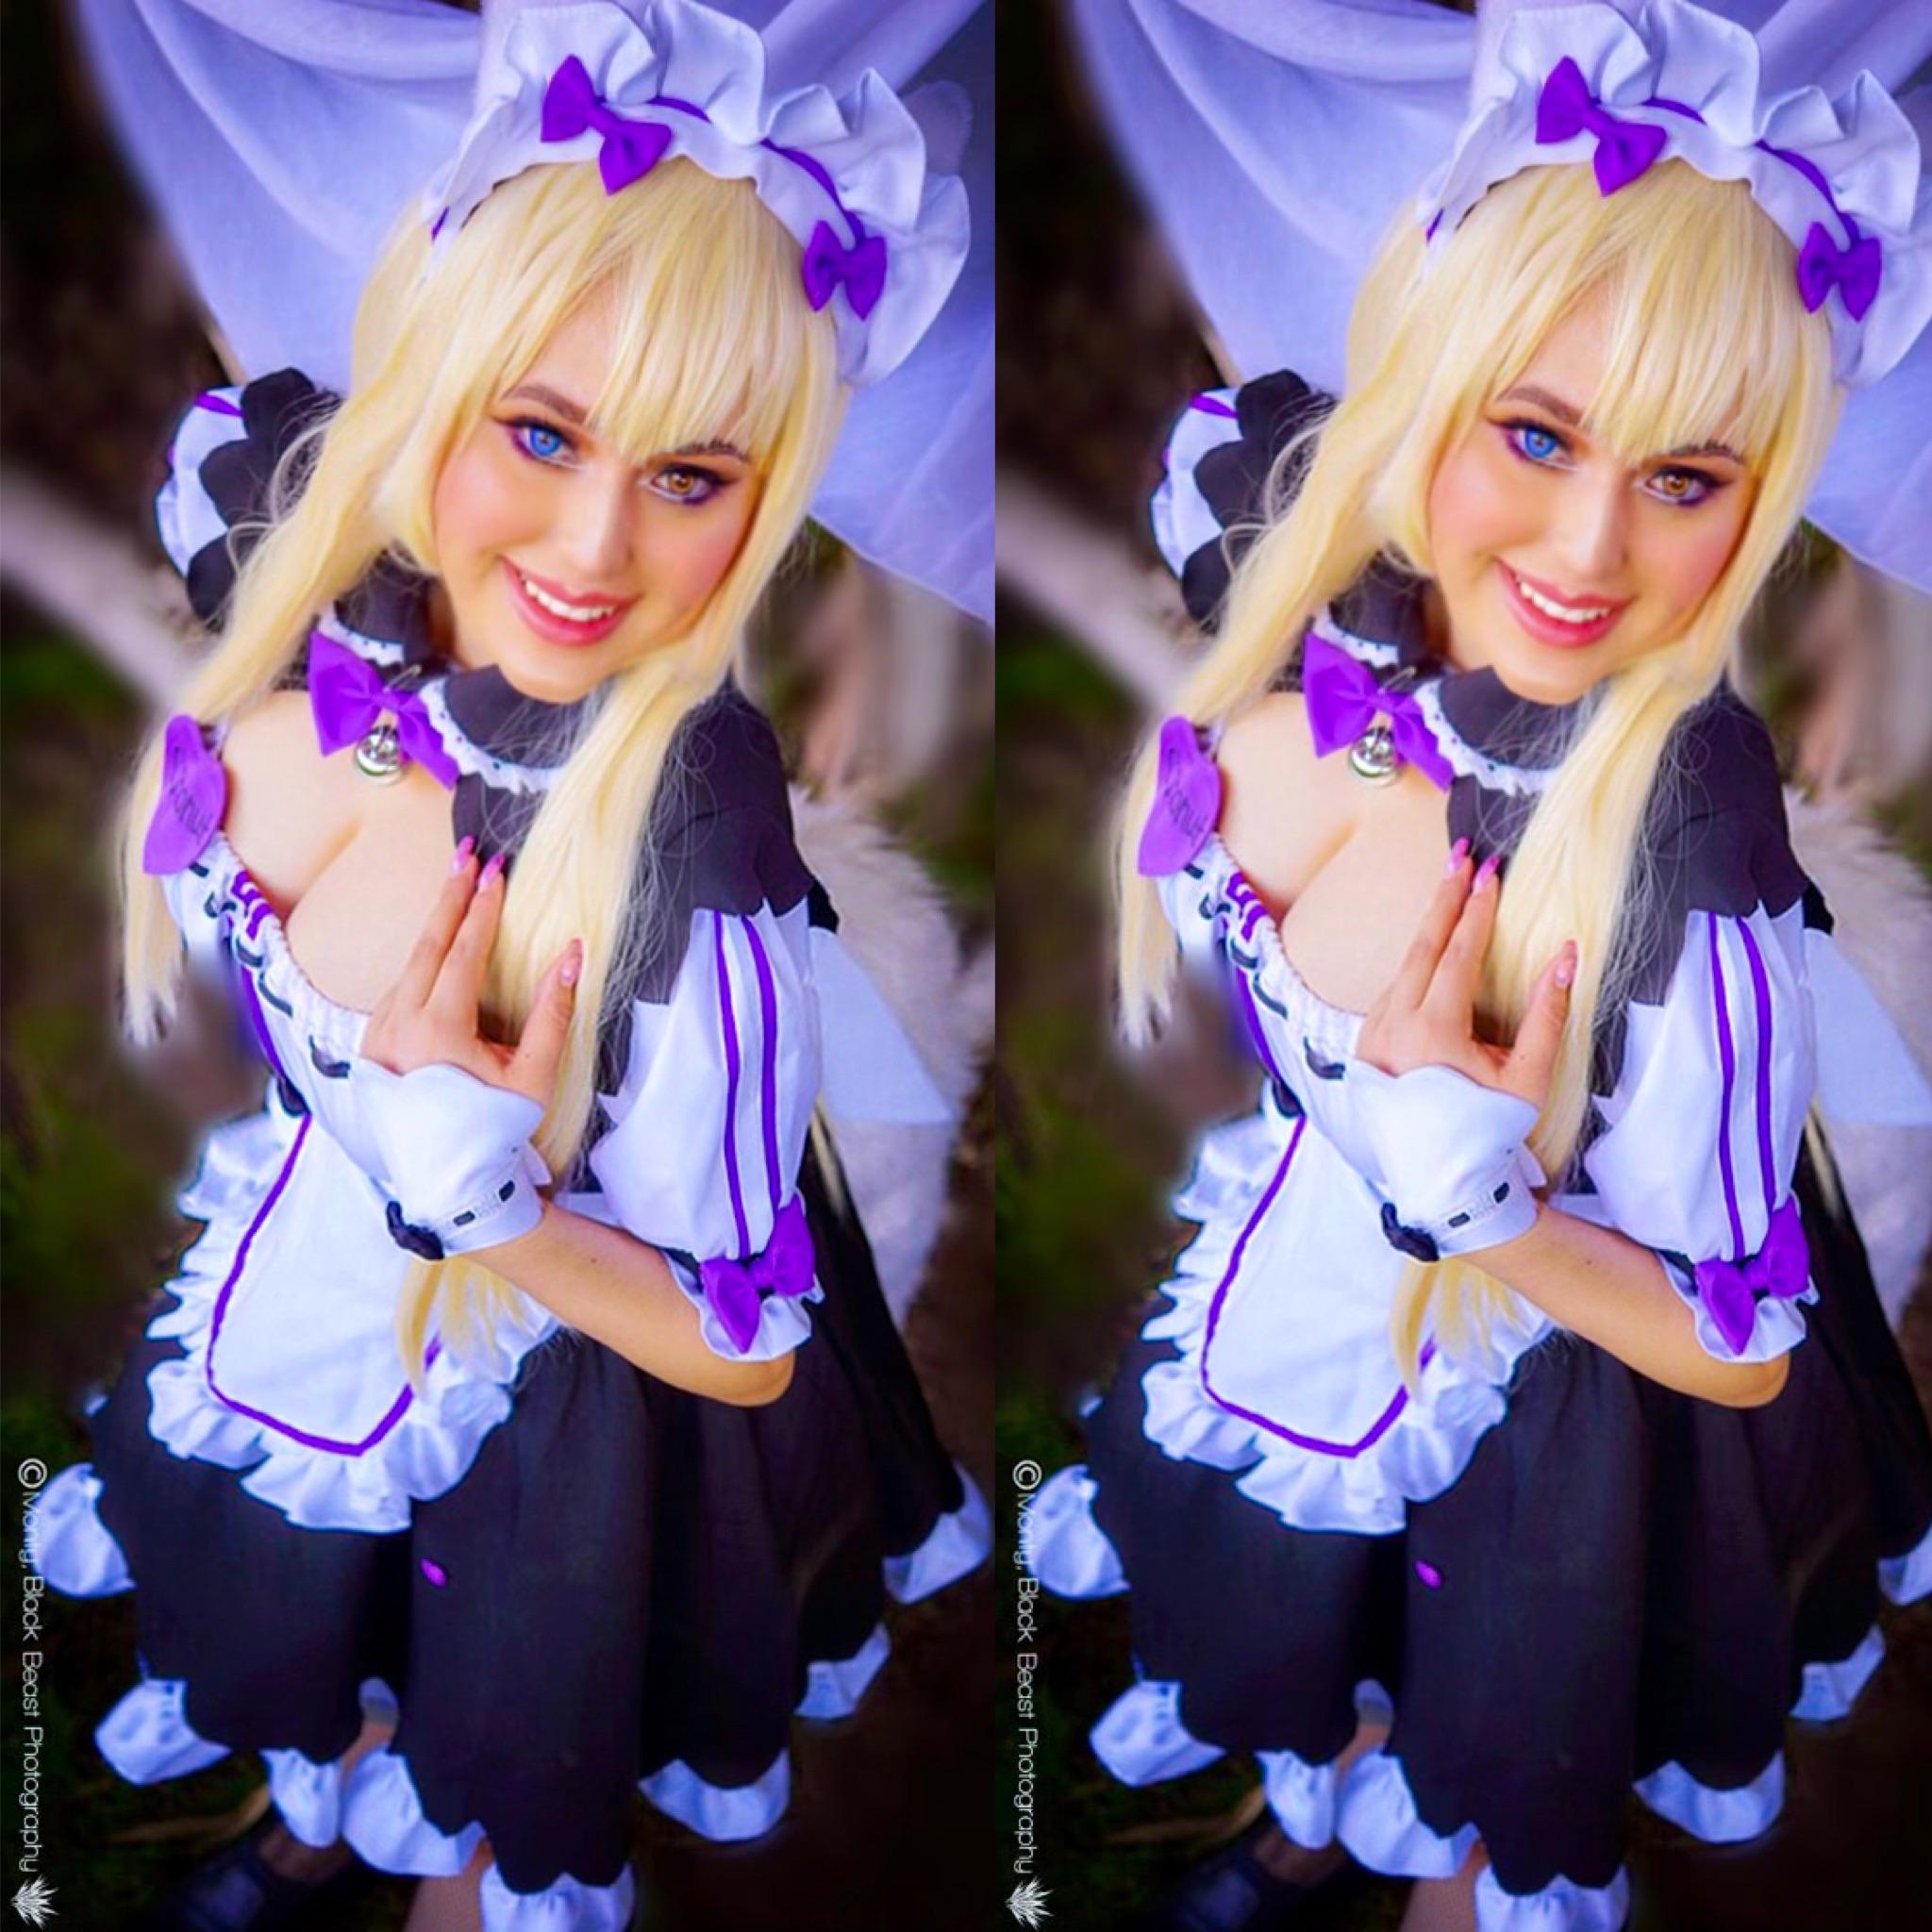 Coconut From Nekopara By Larisusa. Picture Taken By Black Beast Photography